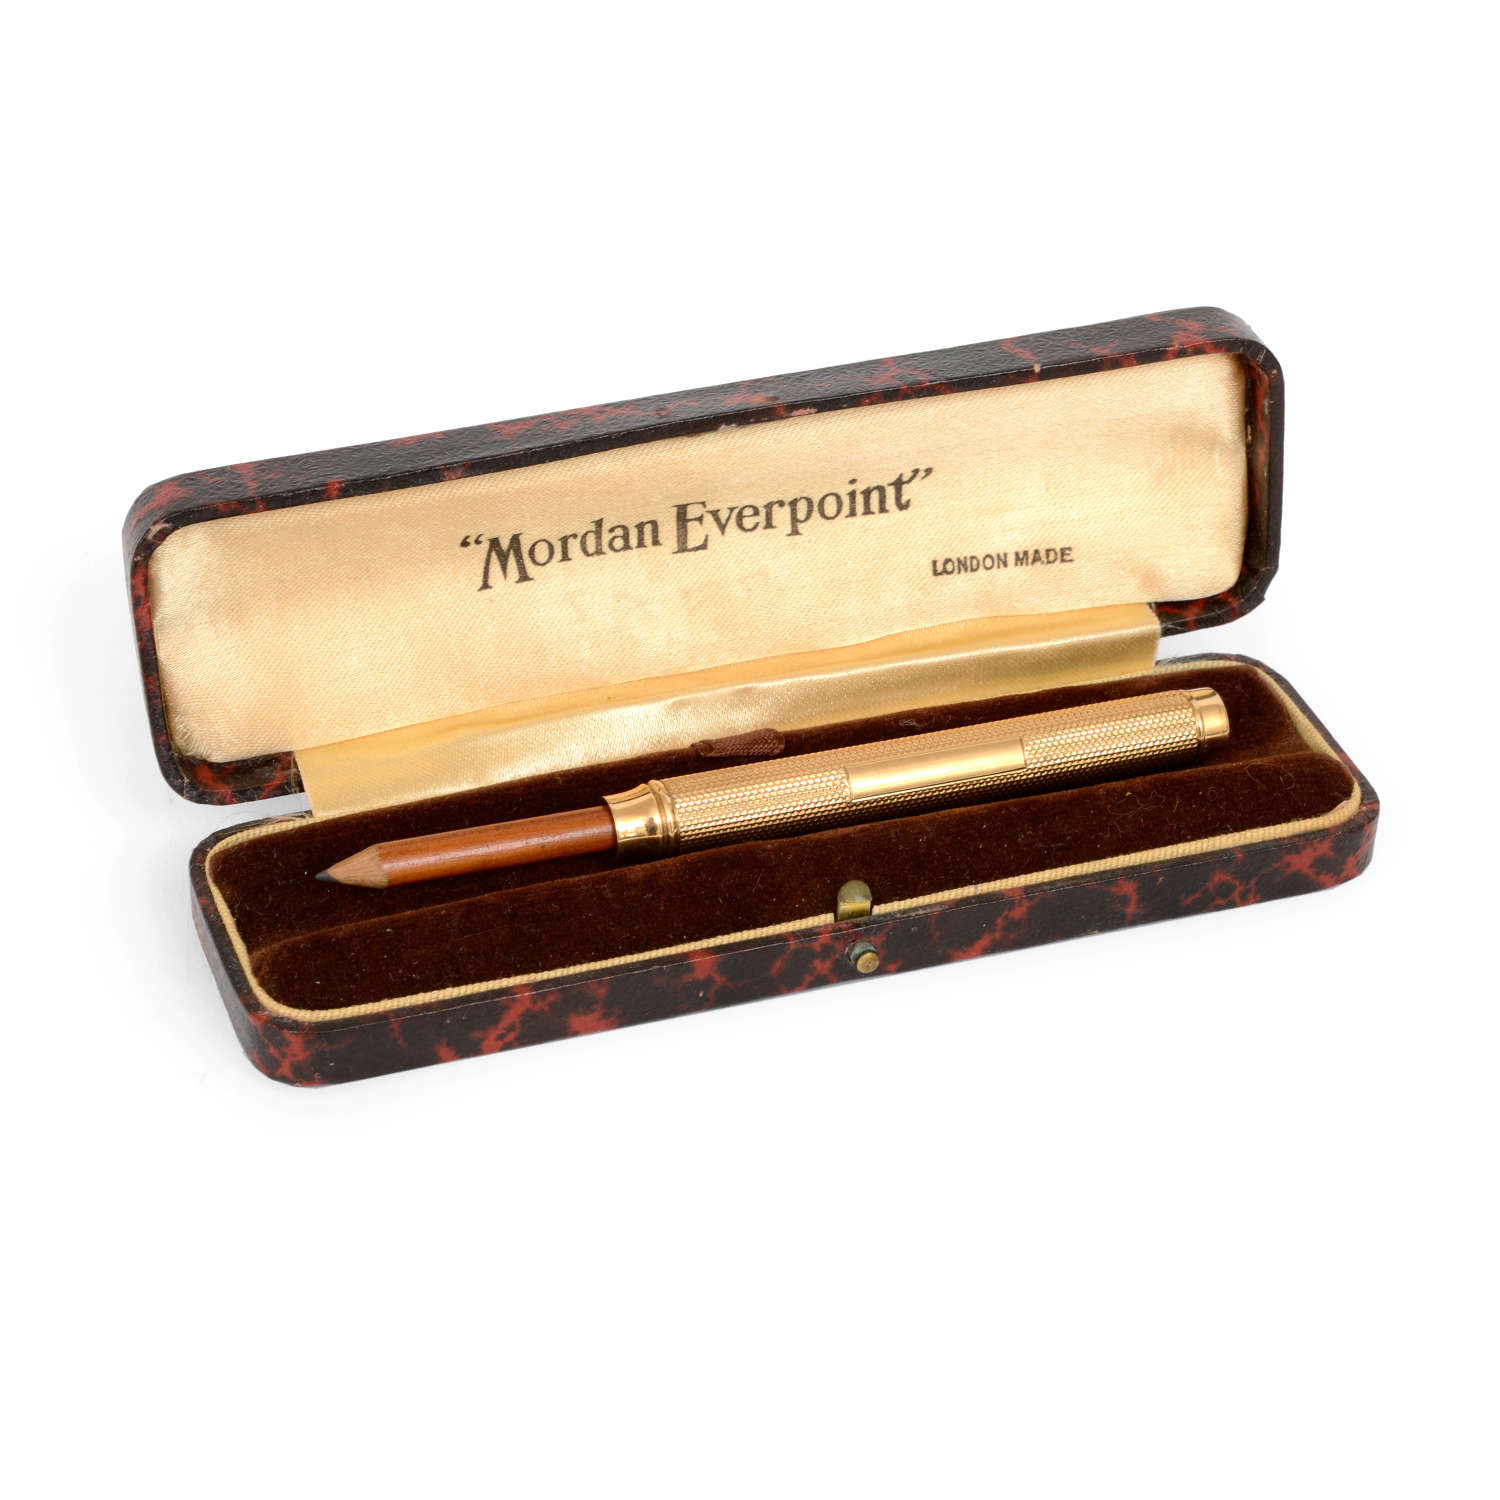 A 9ct Gold Sampson Mordan Everpoint Pencil